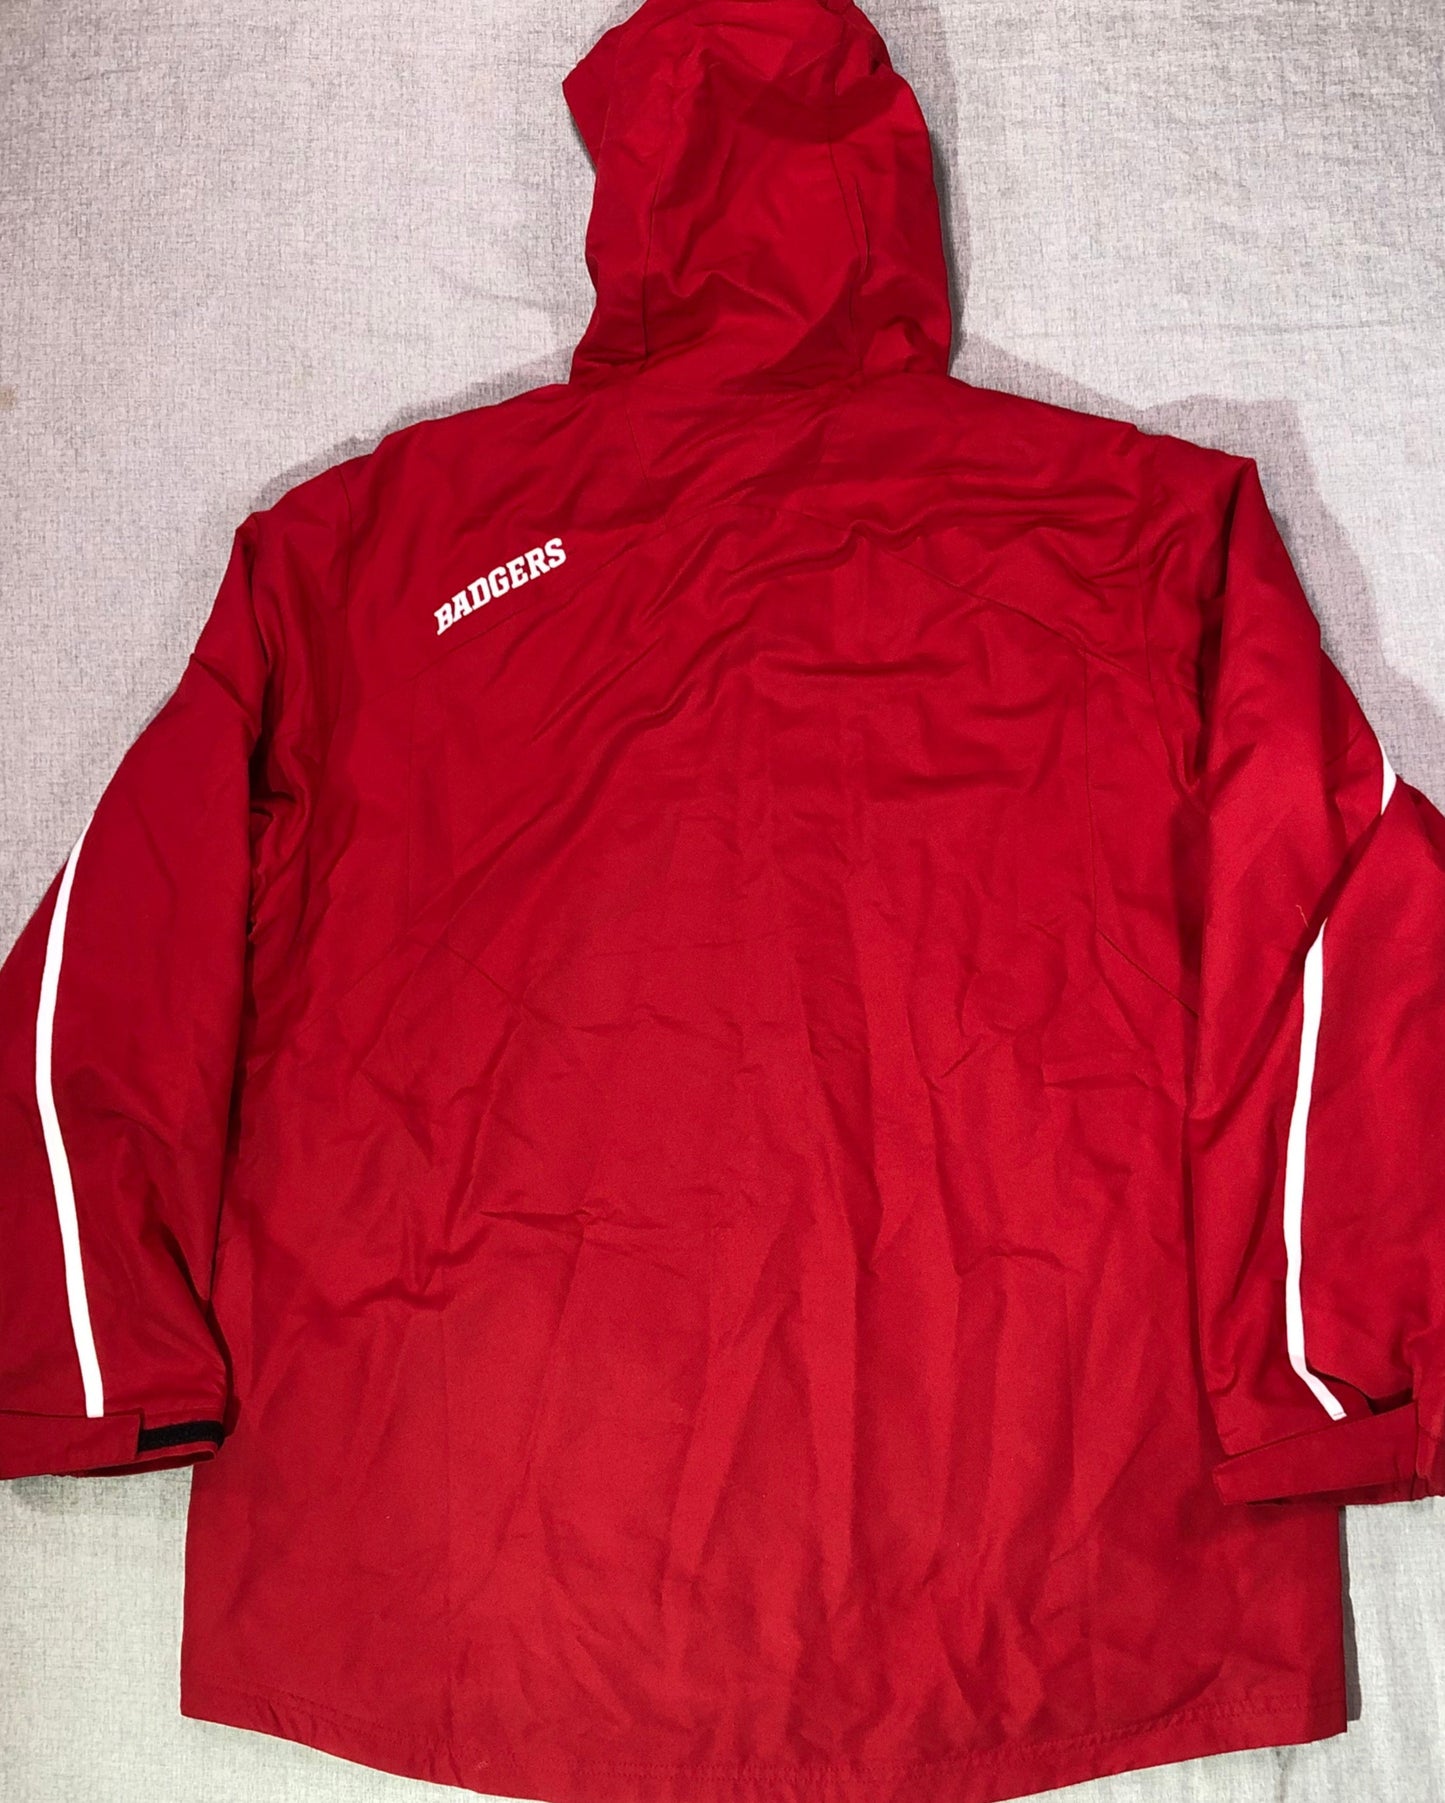 Wisconsin Badgers Jacket Mens XL Red adidas ClimaProof Full Zip Hooded NCAA PREOWNED